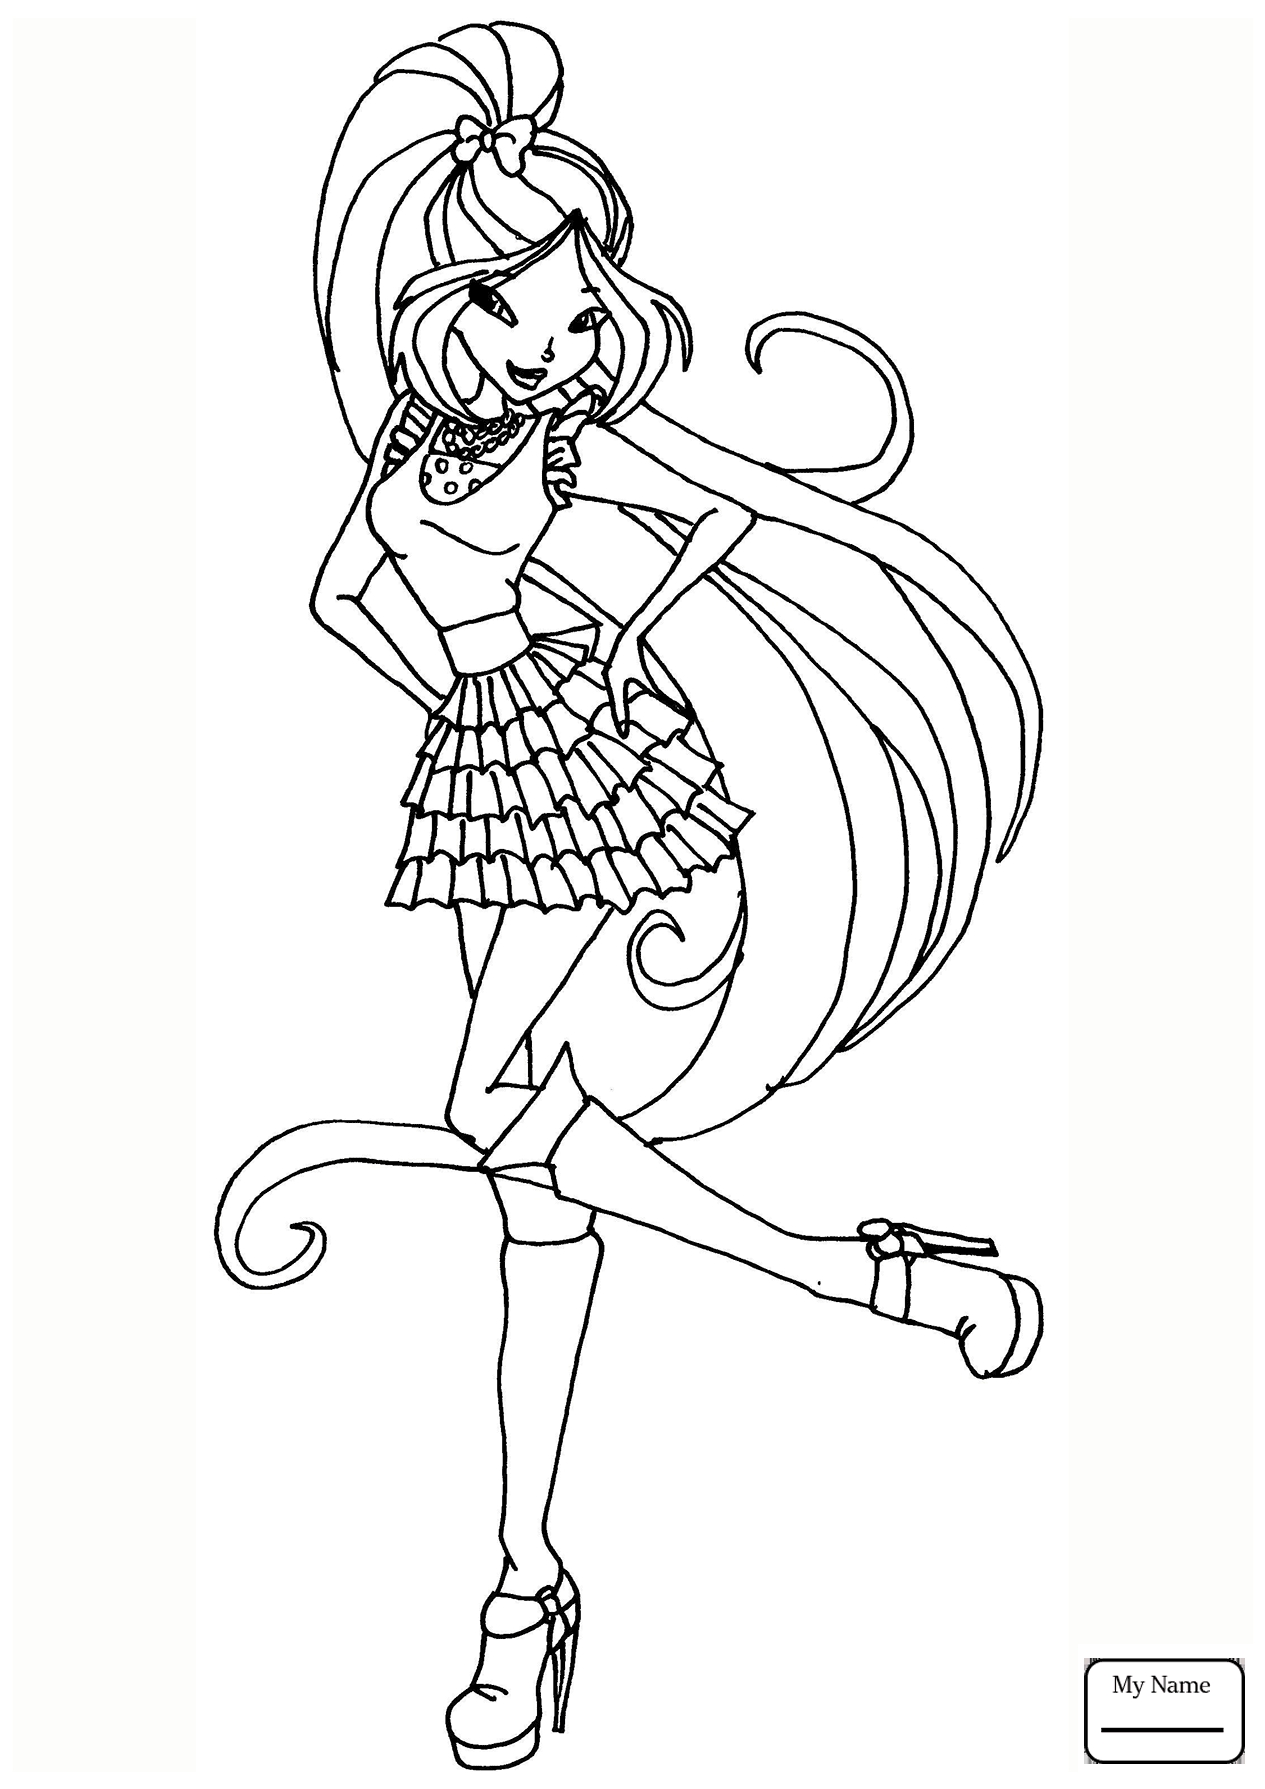 Winx Club Flora Coloring Pages at GetColorings.com | Free printable